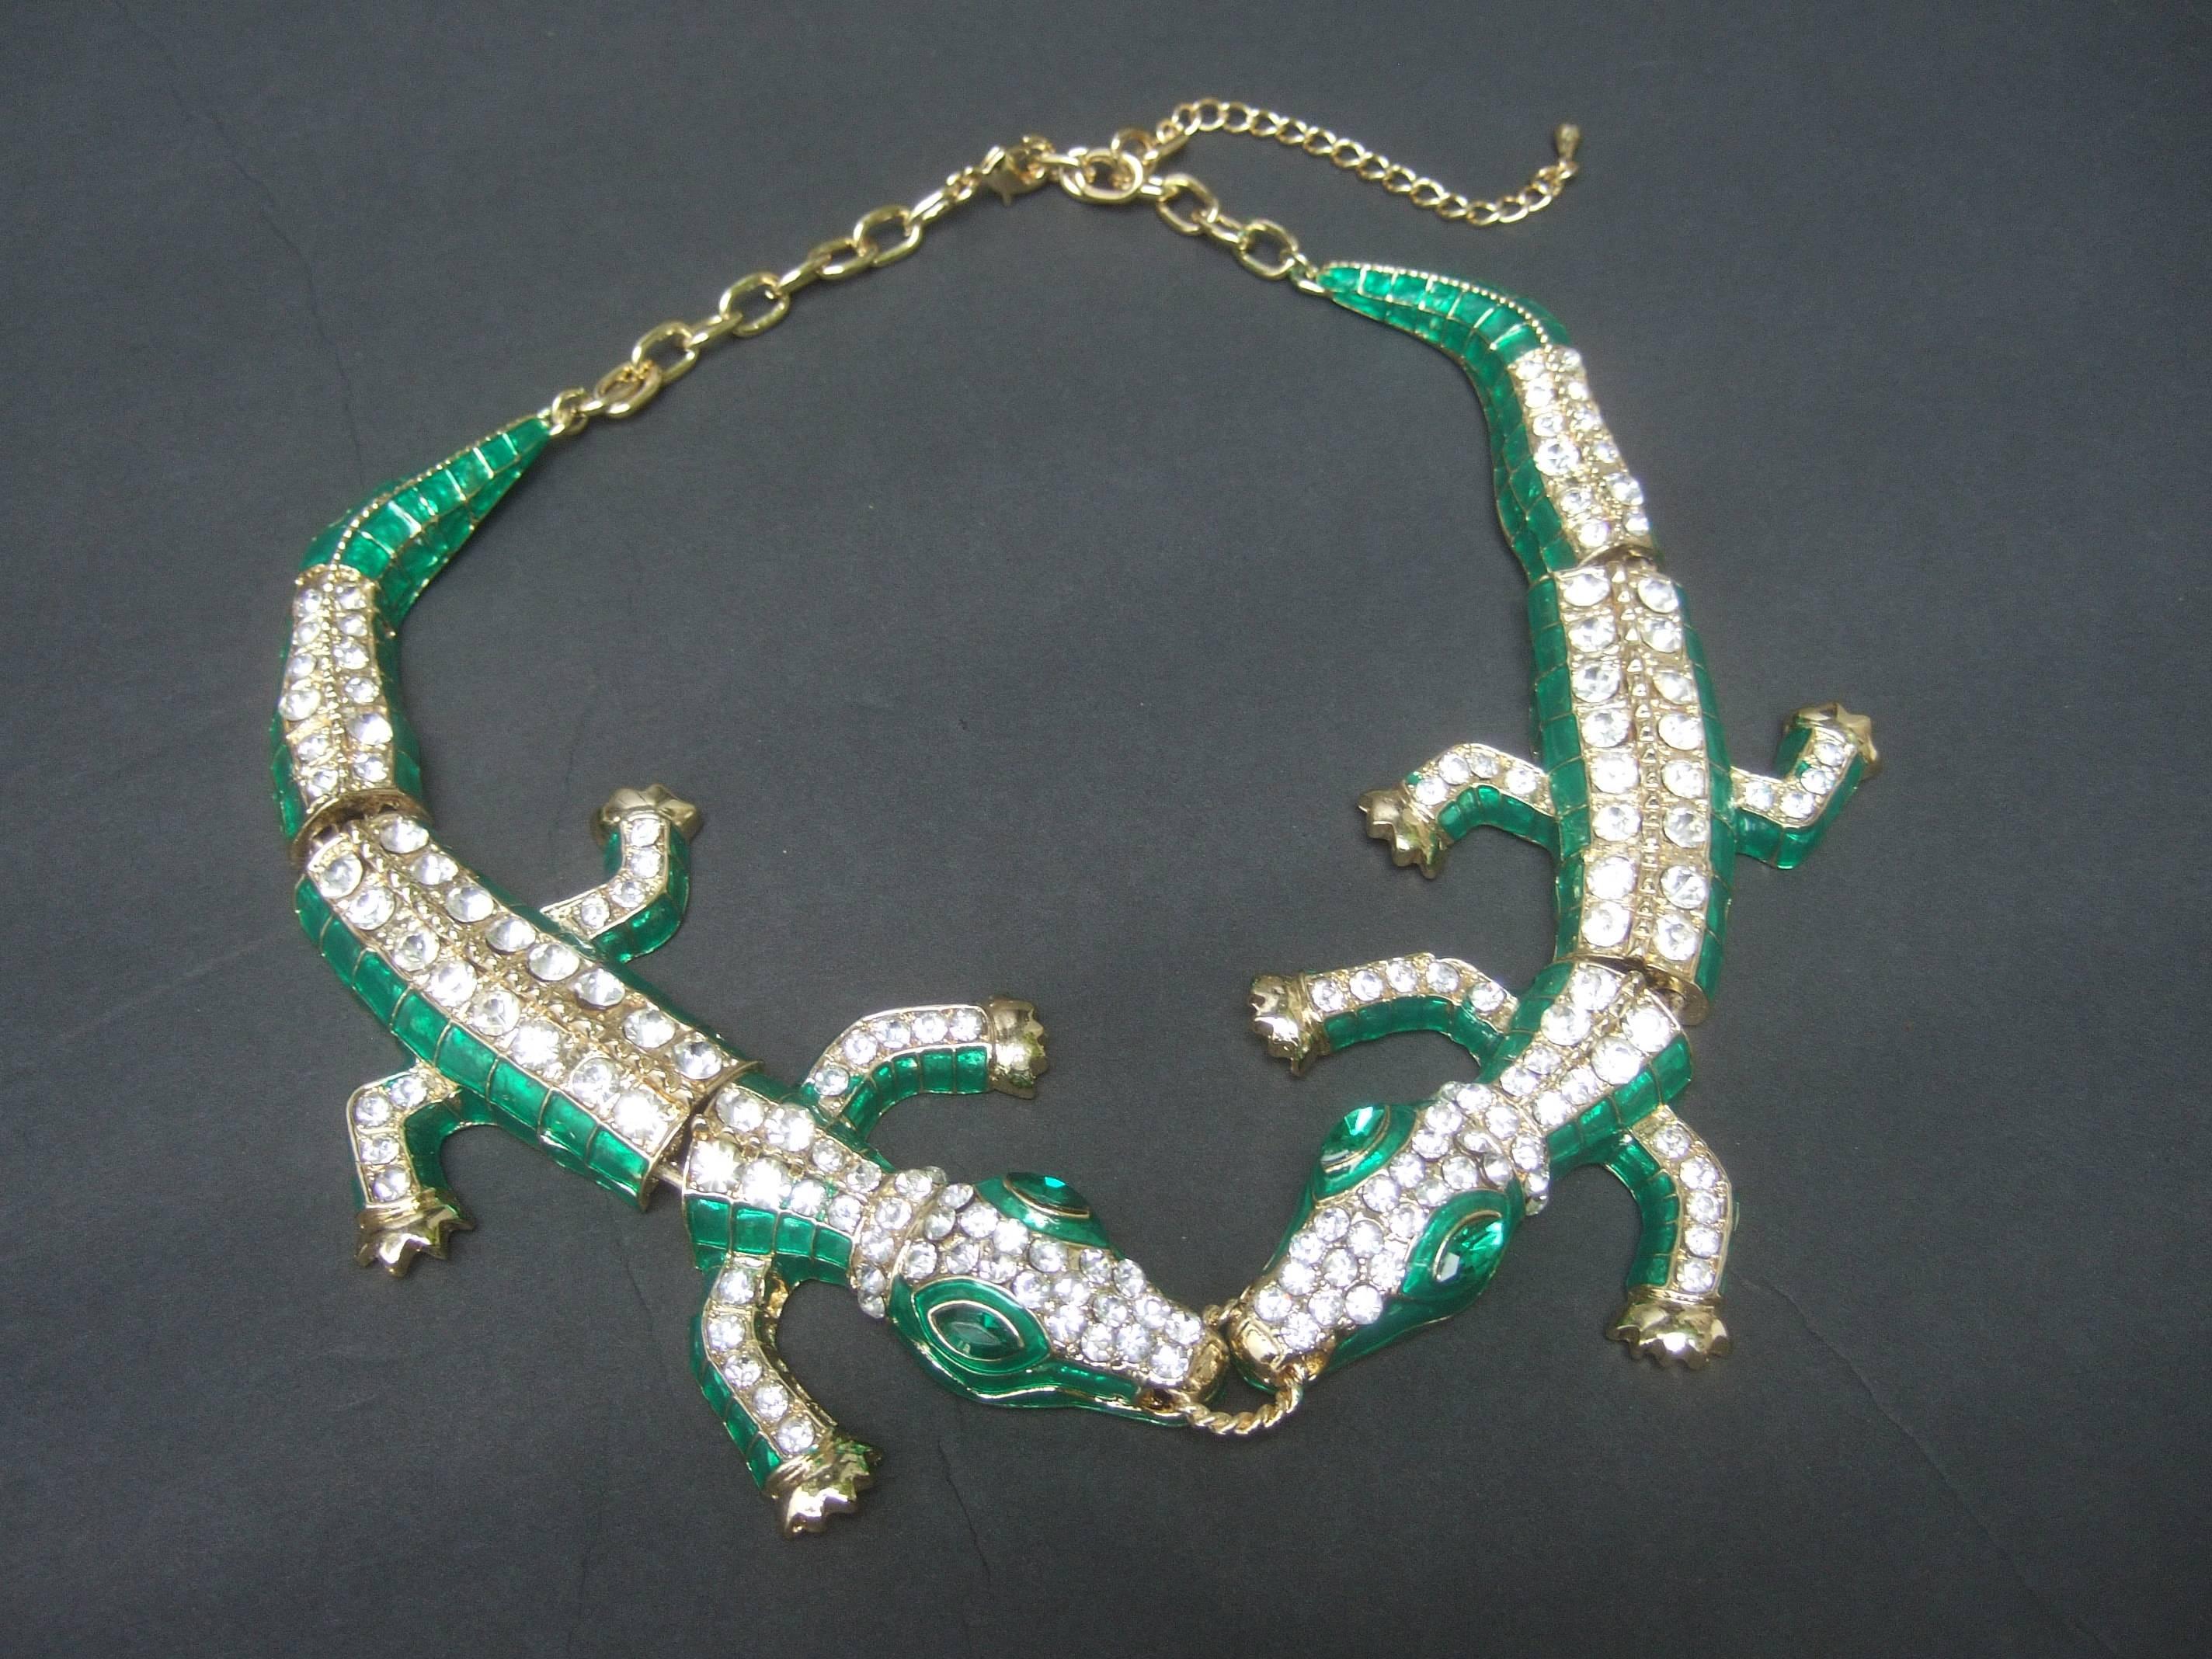 Exotic green crystal articulated enamel alligator necklace
The unique choker style necklace is designed with a 
pair of jewel encrusted alligators; hinged together 
in the center with a gilt metal ring cinched in their mouths

The alligators